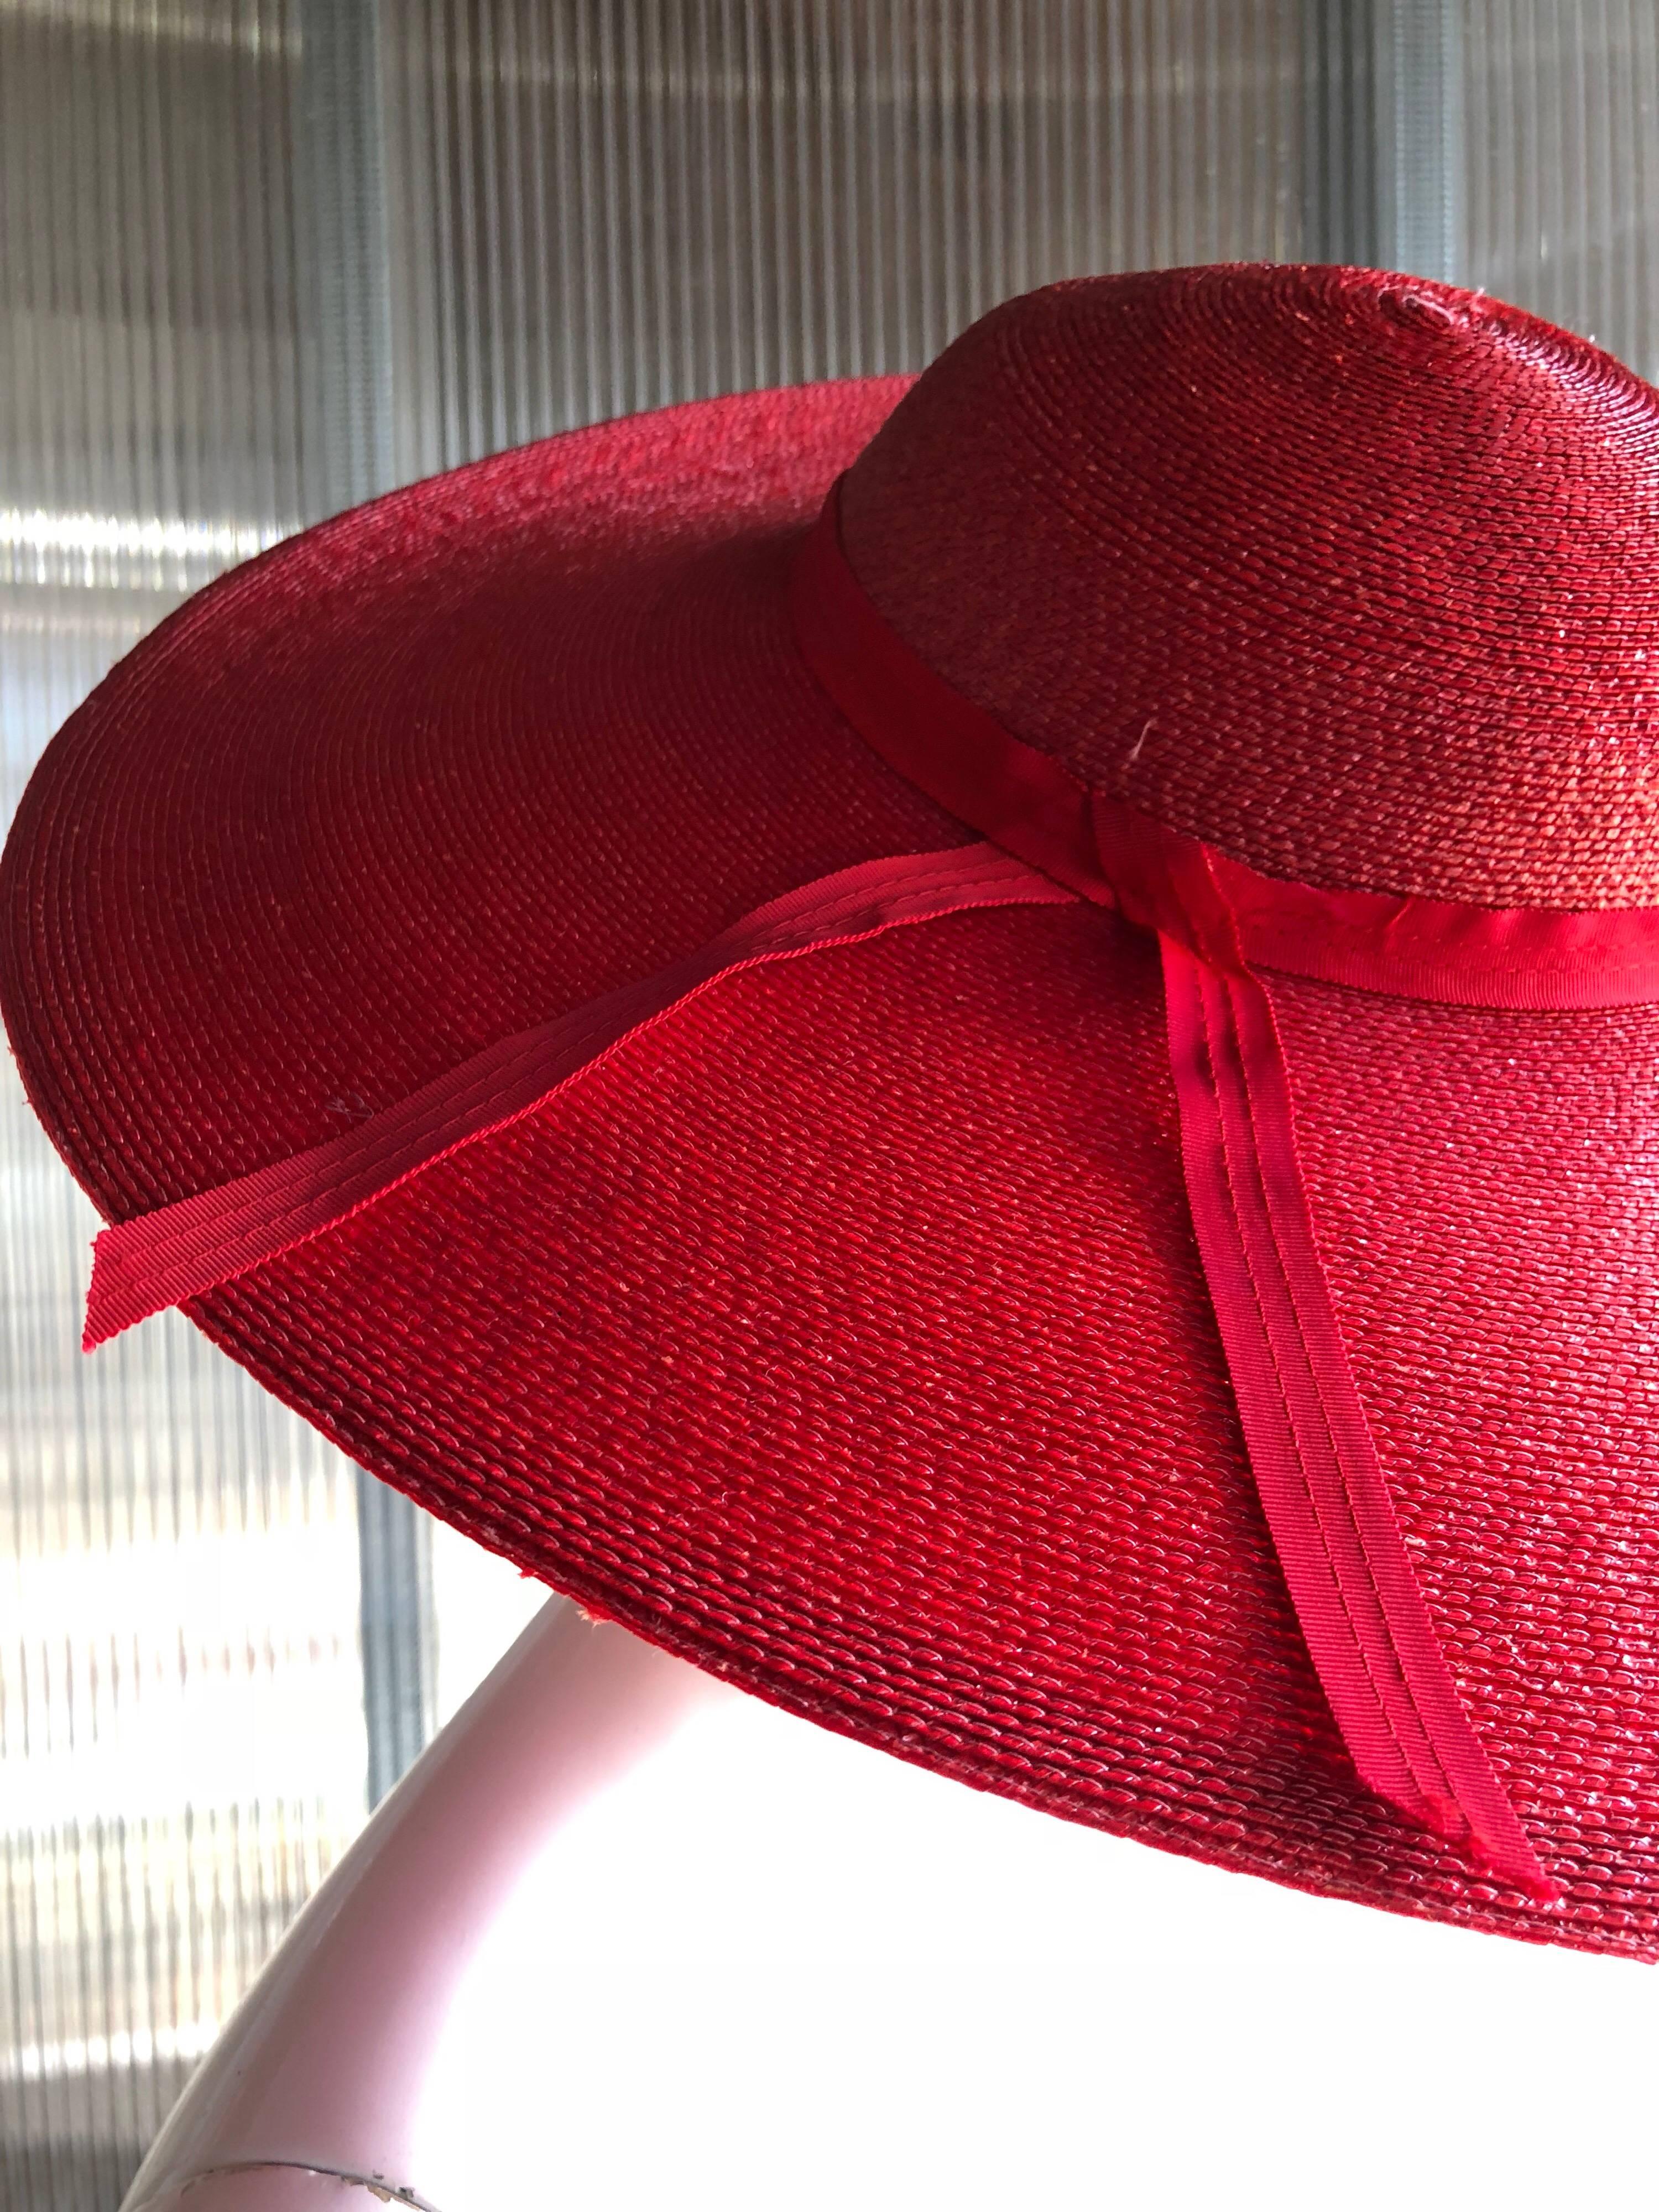 This 1980s red wide brimmed circular or saucer-shape design hat by Bellini Original features a low round crown. Typically, it is worn at an angel to show off the curve of the brim.
Woven in shiny red Milanese straw in a 1950s style revival 